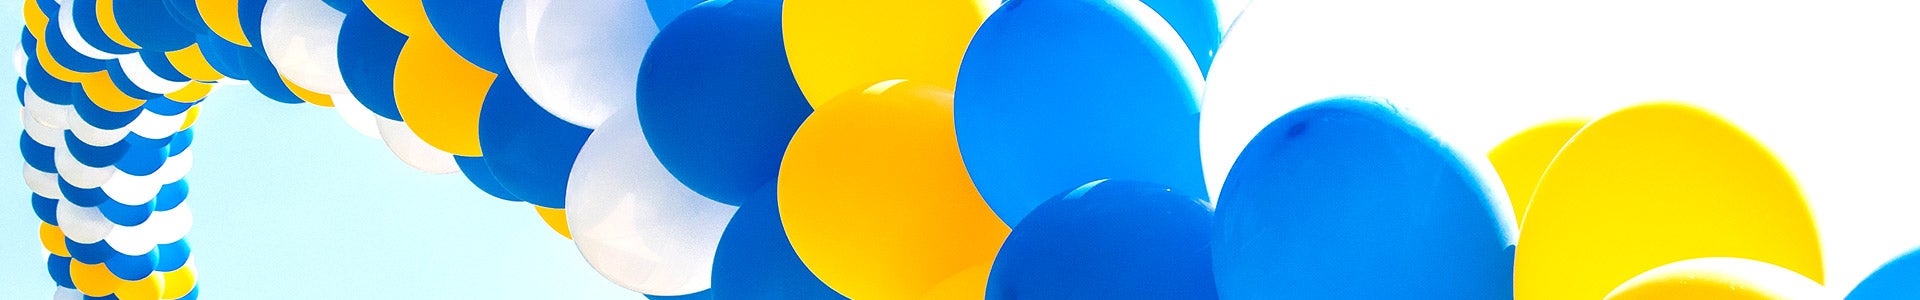 Balloons Fly in UCR School Colors During Involvement Fair